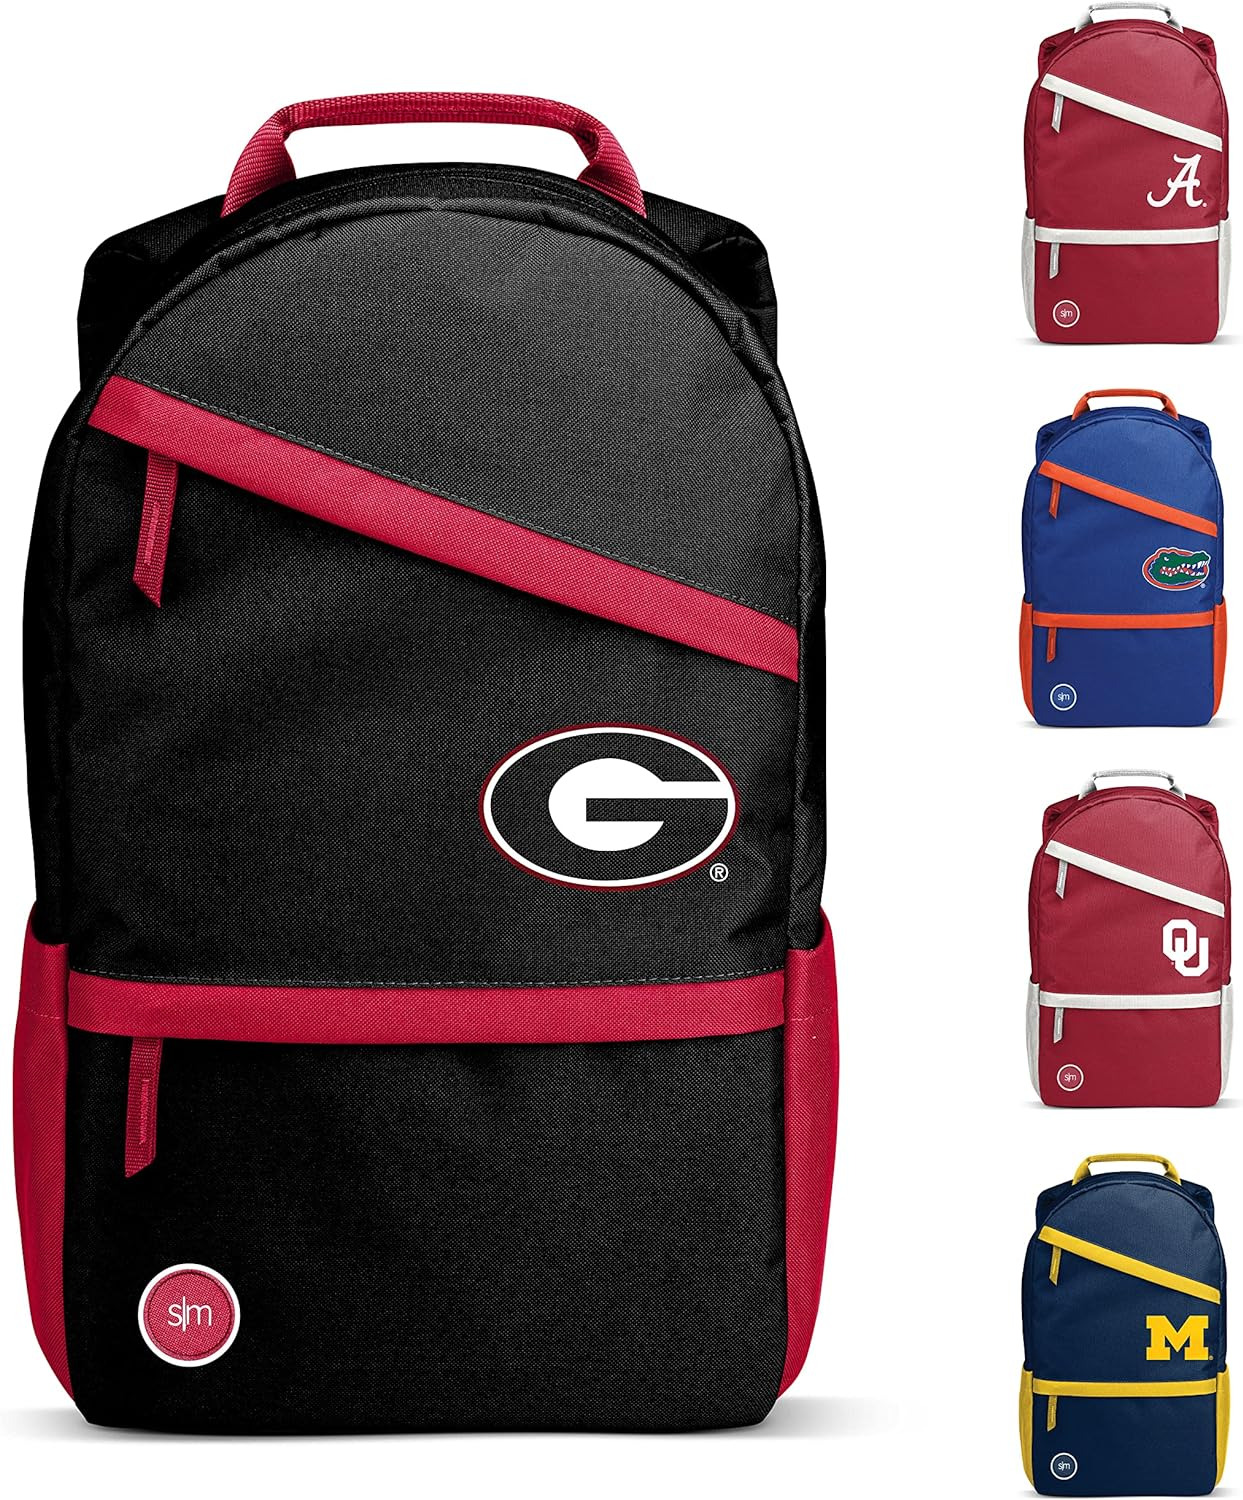 Officially Licensed Collegiate Backpack with Laptop Sleeve, Team Color, 20L